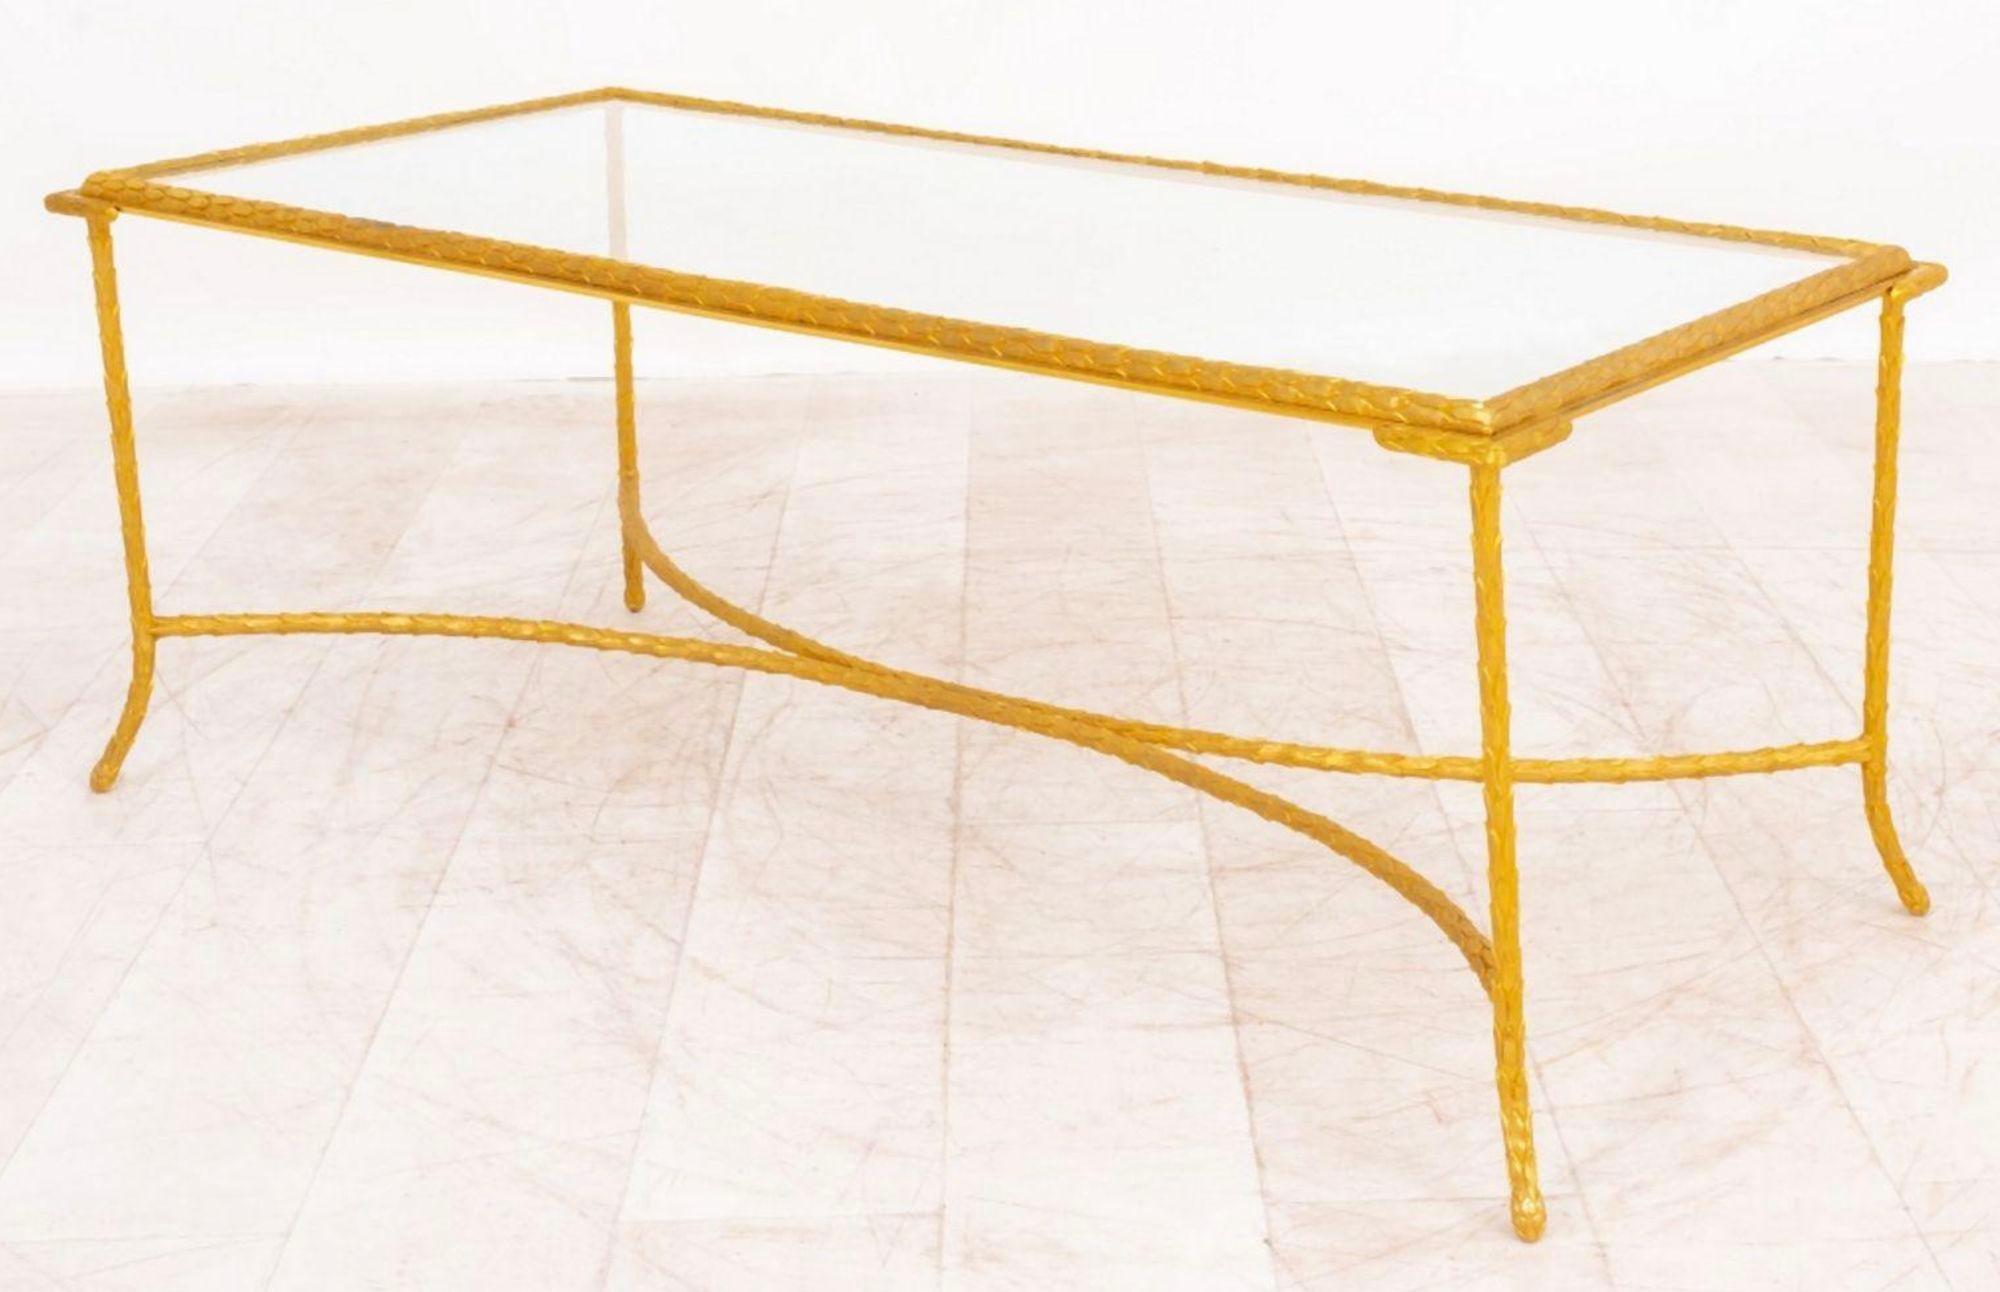 Sleek mid-century low coffee table by Maison Jansen made with rich ormolu and a glass top. The bronze frame is adorned with intricate laurel leafs all around. The table is linked by stretchers at the bottom supporting the table.
Made in France, c.